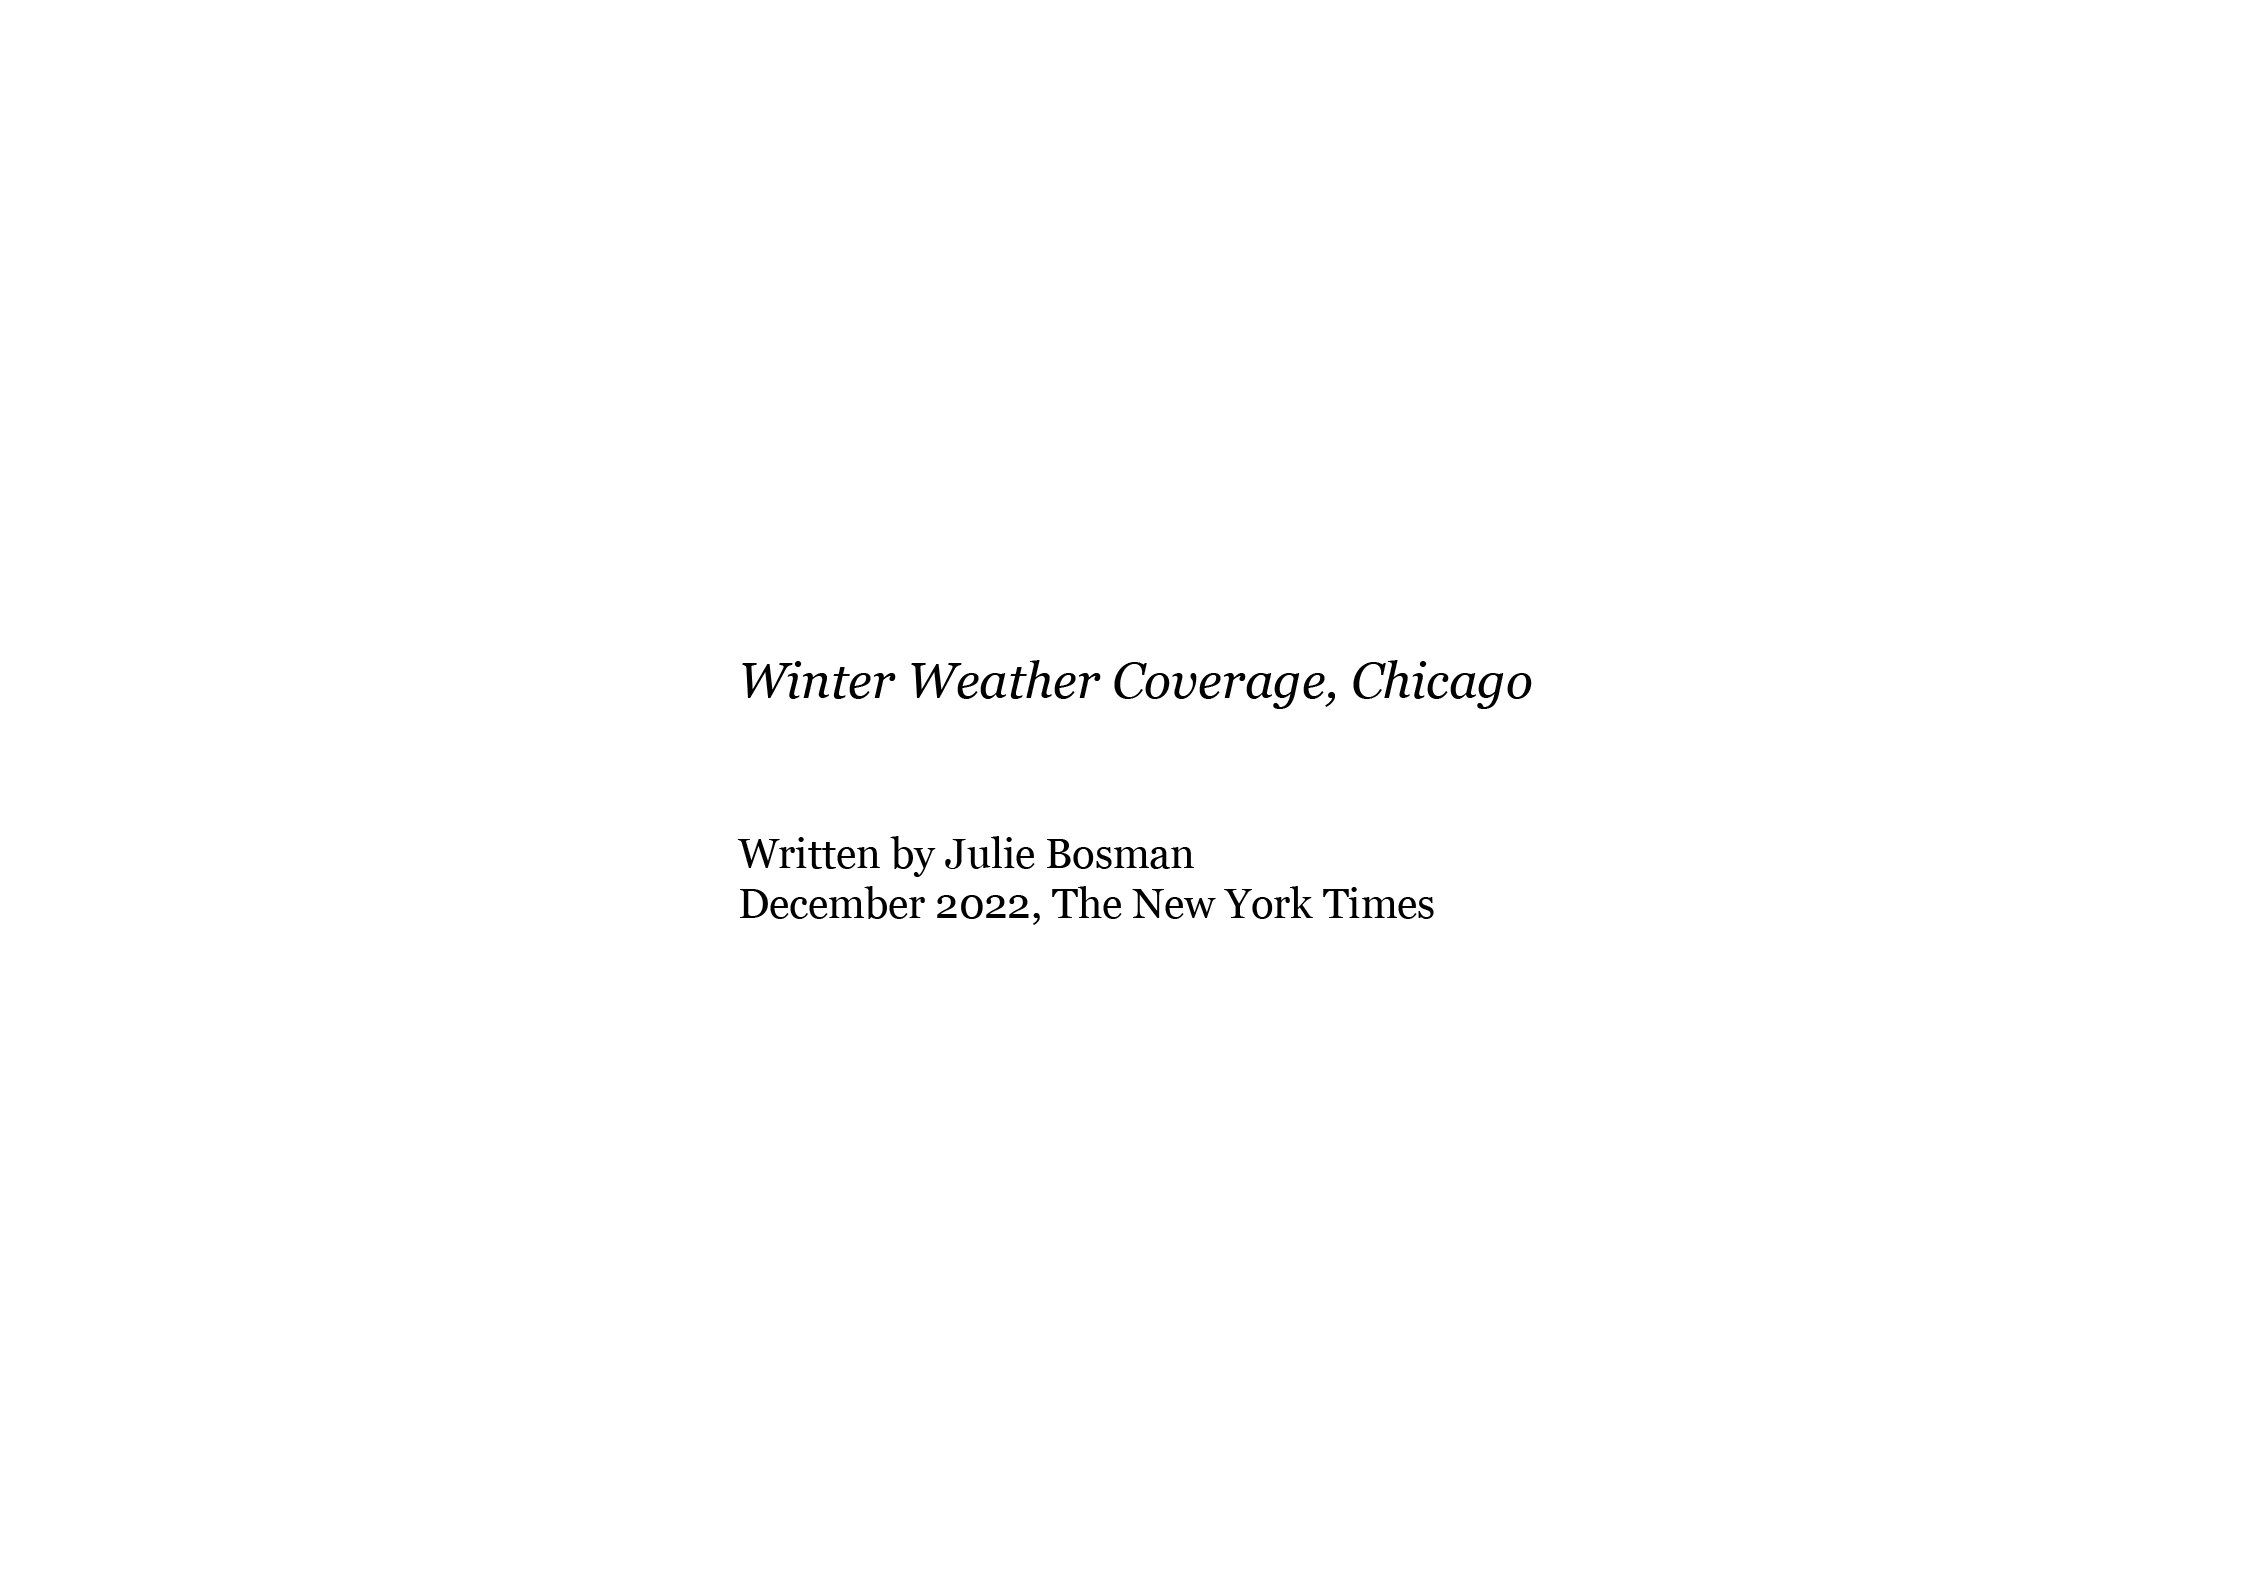  Chicago Winter Weather Storm  The New York Times, 2022  